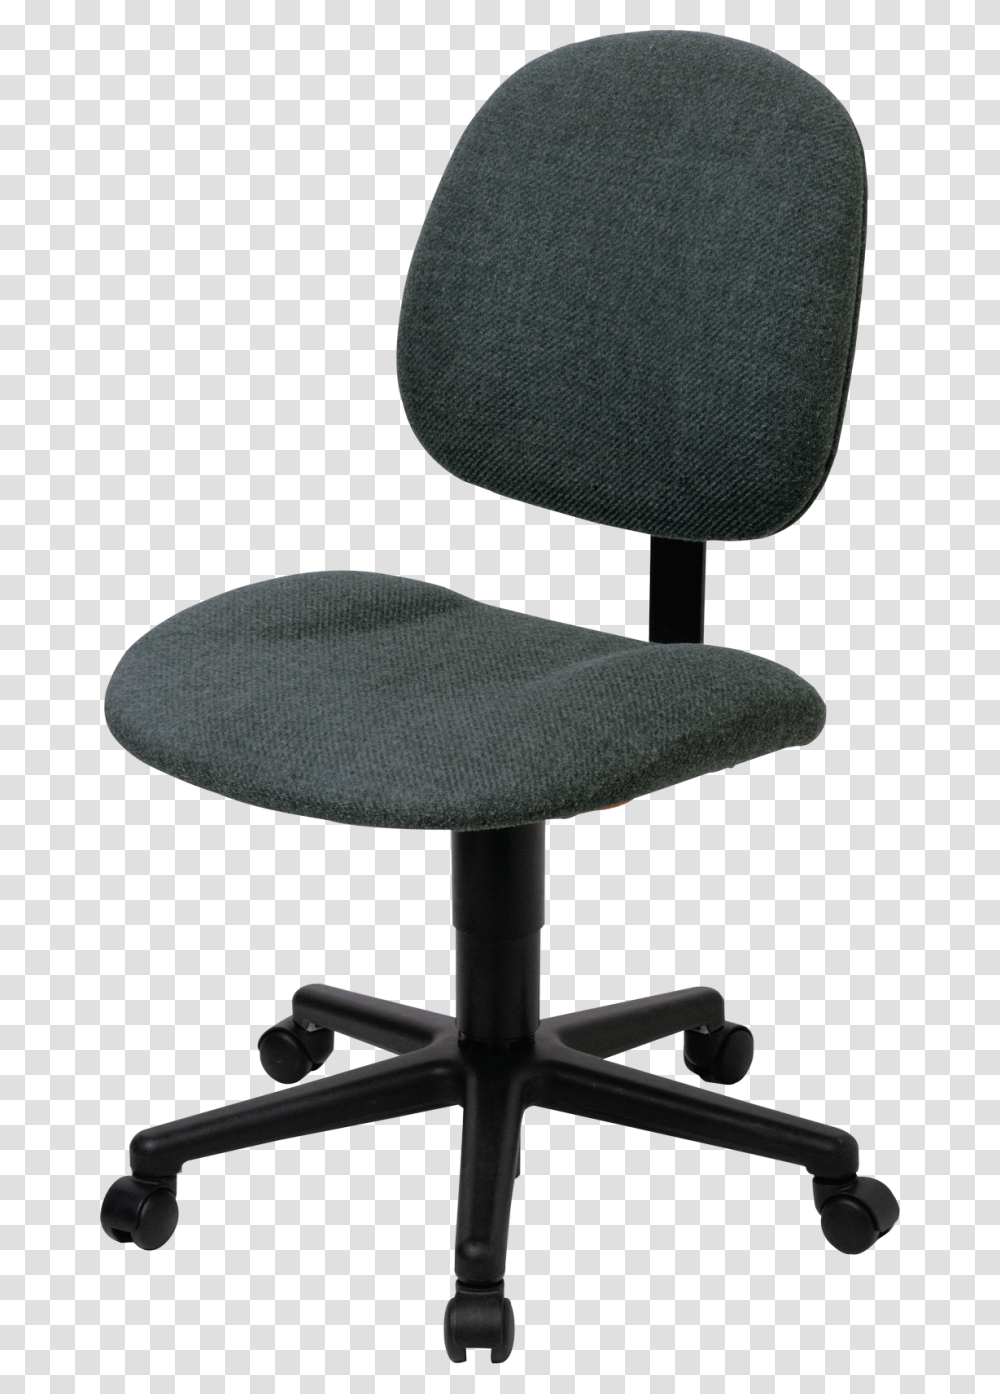 Chair Image Office Chair, Cushion, Furniture, Pillow, Headrest Transparent Png